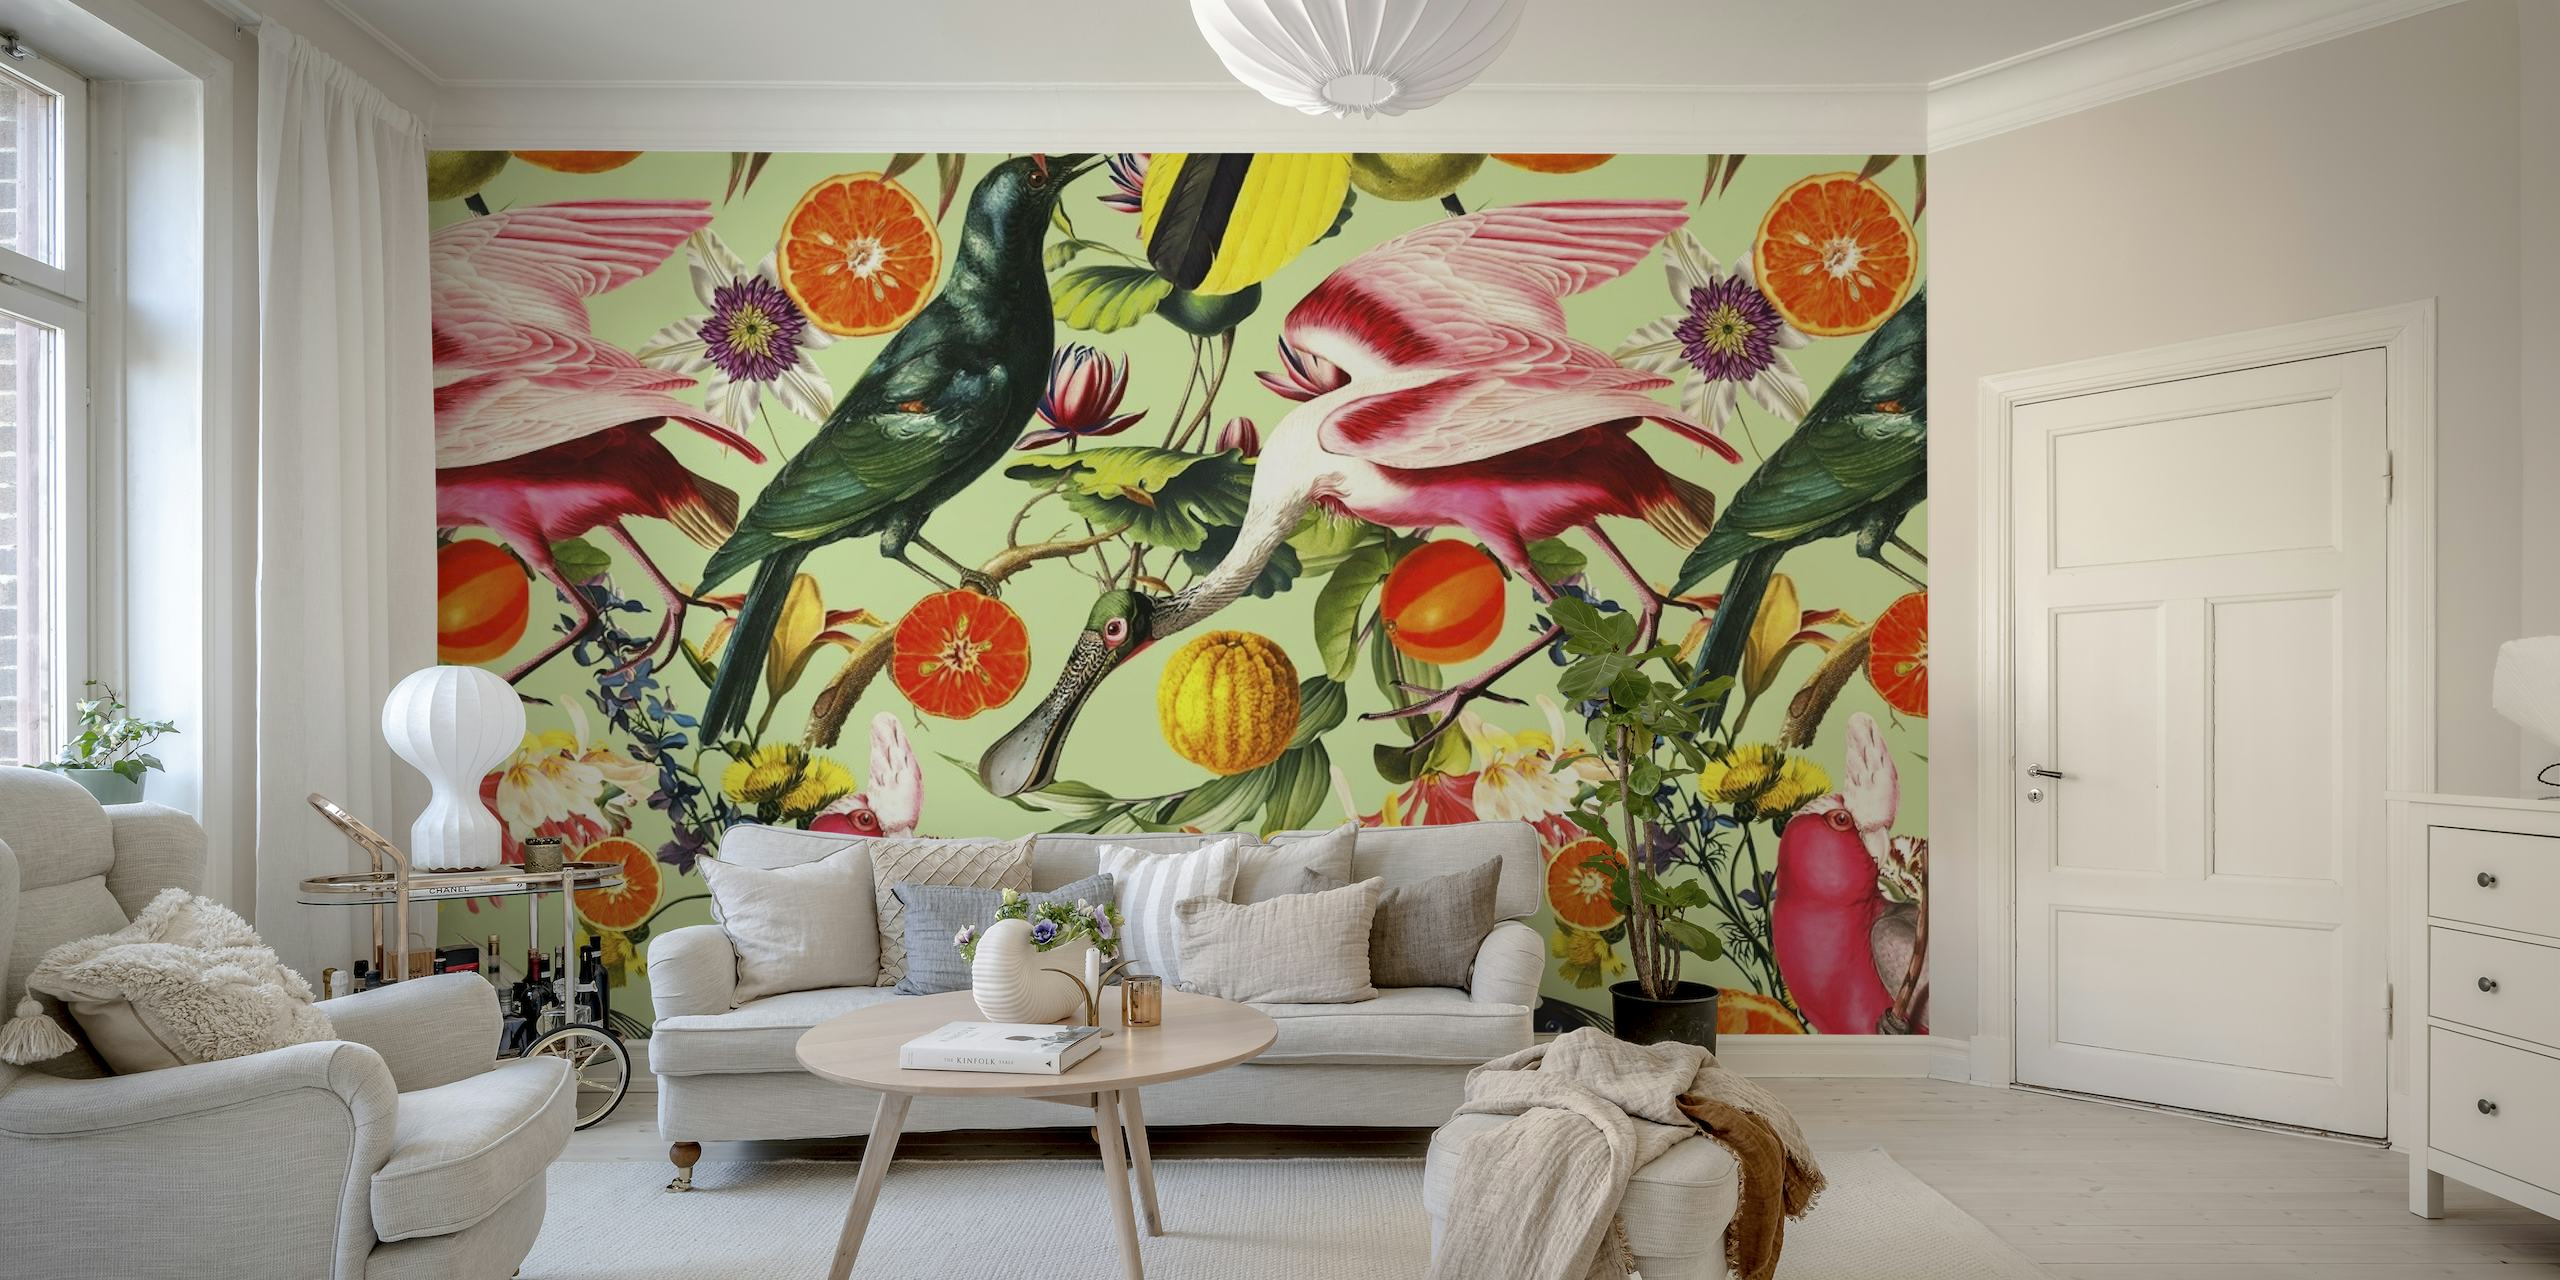 Colorful wall mural of exotic birds and vibrant flowers on a serene background